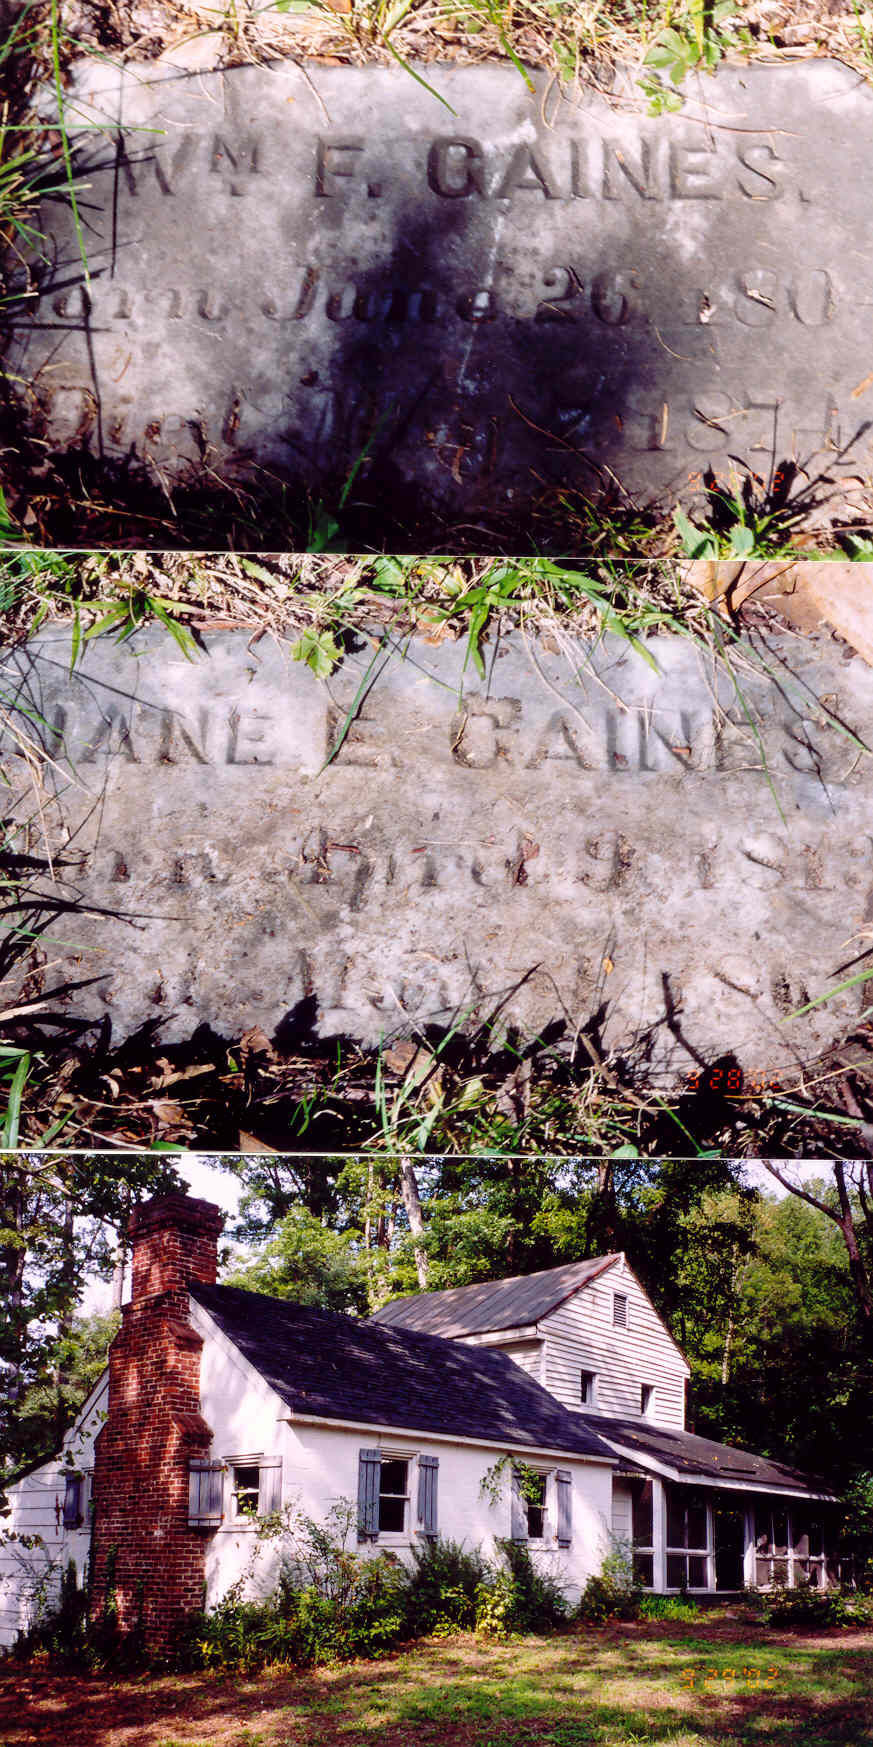 House at Gaines Mill and tombstones of William F. Gaines and Jane Spindle Gaines